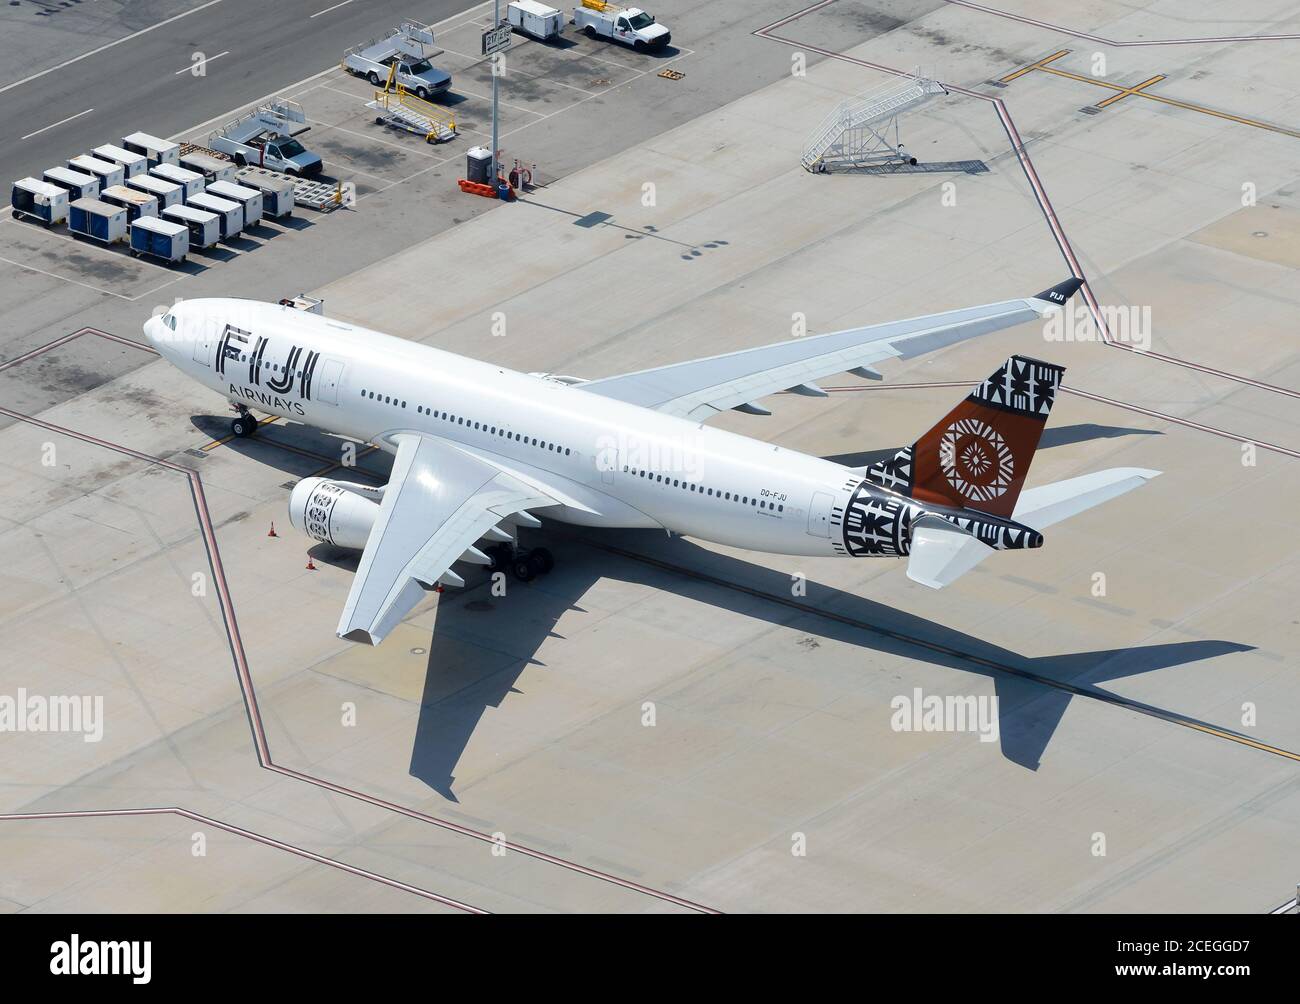 Fiji Airways Airbus A330 parked at Los Angeles International Airport. Airbus A330-200 DQ-FJU of airline from Fiji. Airline from the Pacific. Stock Photo